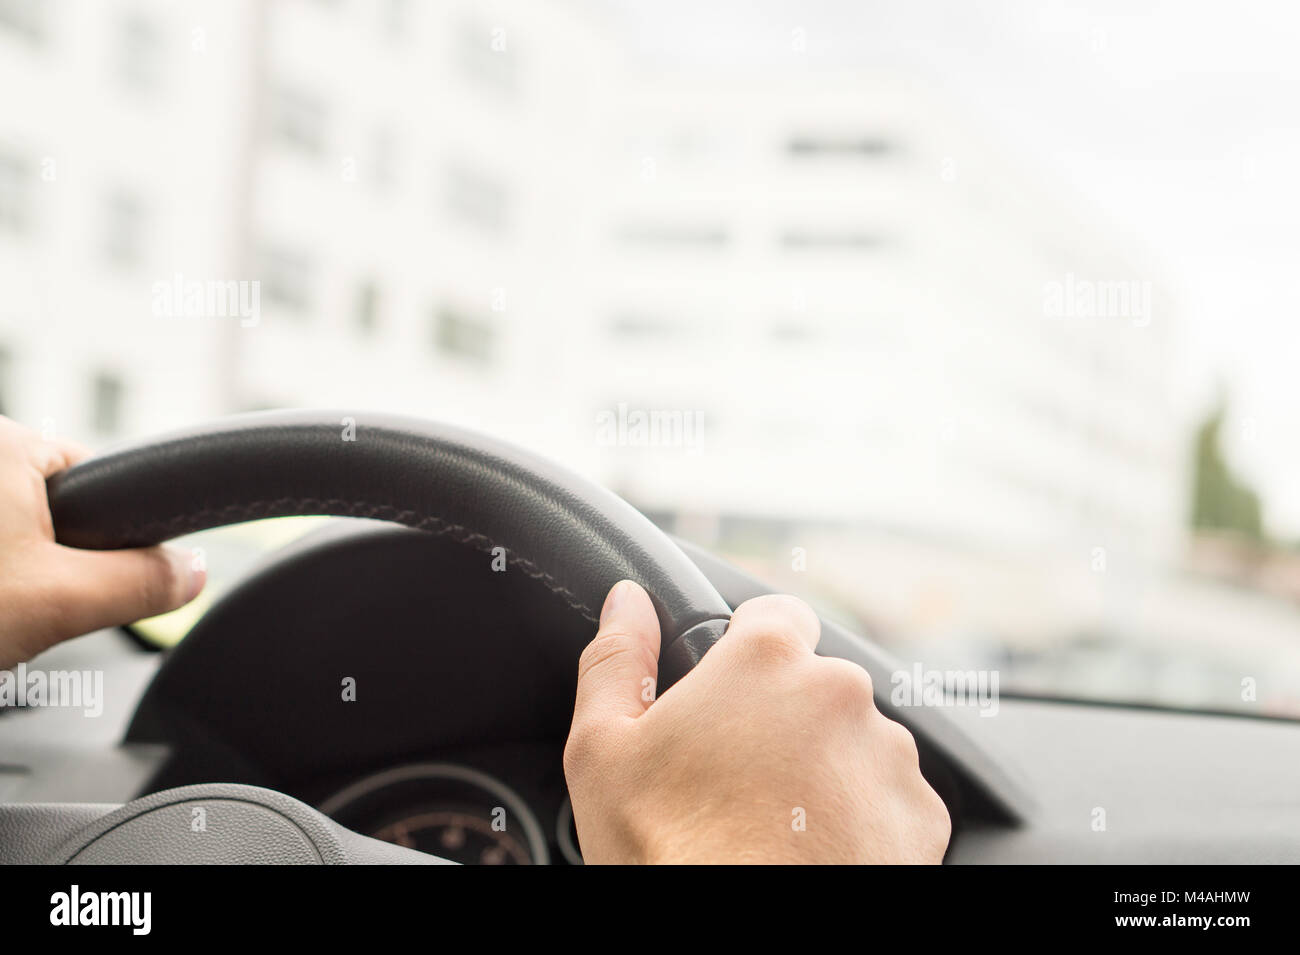 Man driving car in city. Driver holding steering wheel with both hands. Road trip, travel or commute concept. Buildings in the blurred background. Stock Photo